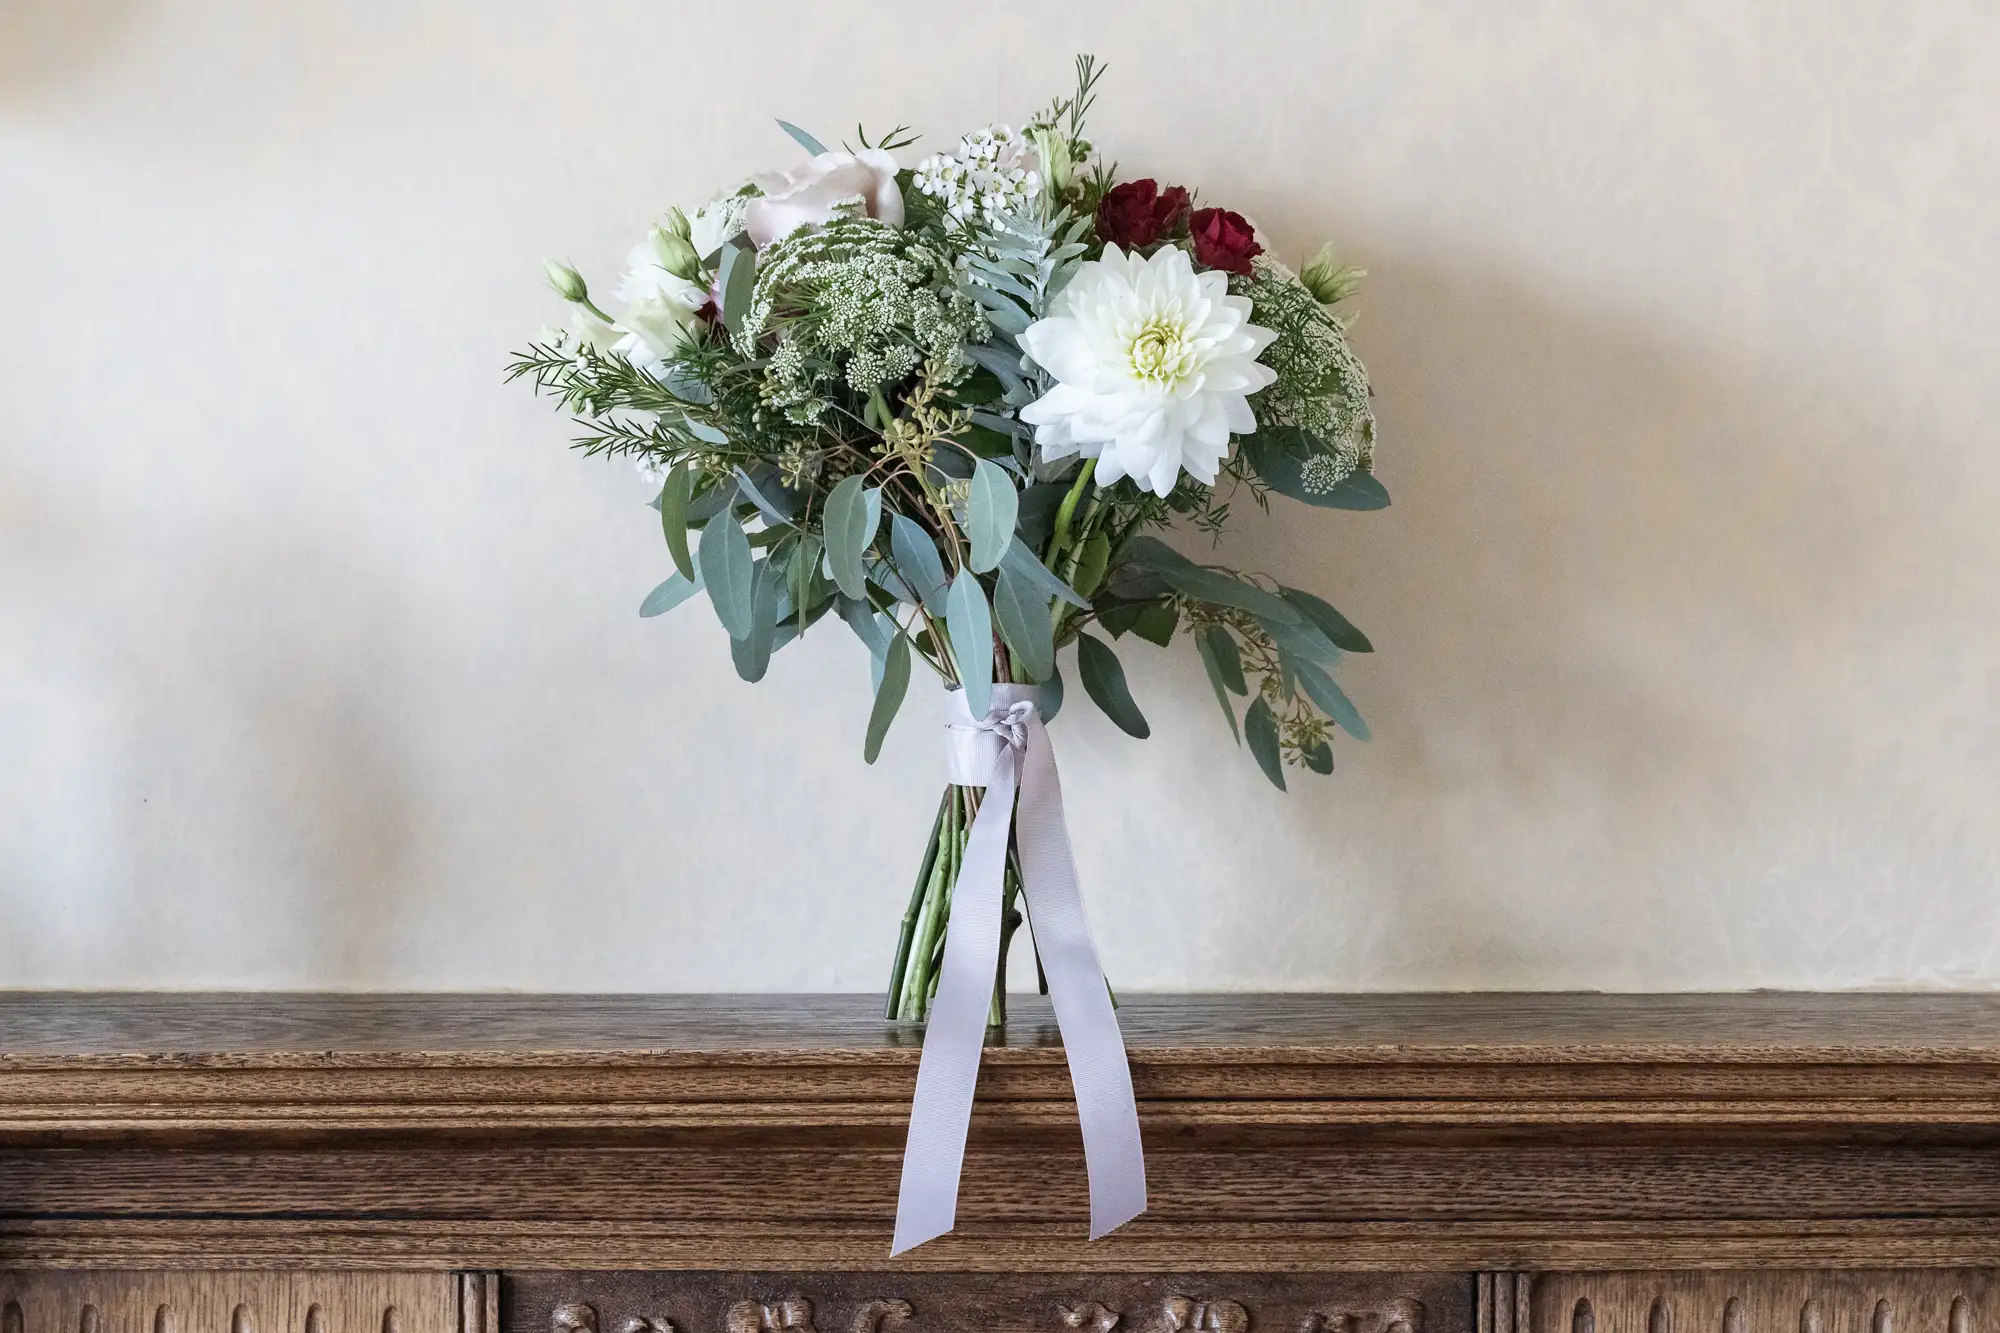 A bouquet of flowers including white, pink, and red blooms with green foliage, tied with a pink ribbon, resting on a wooden ledge against a cream wall.